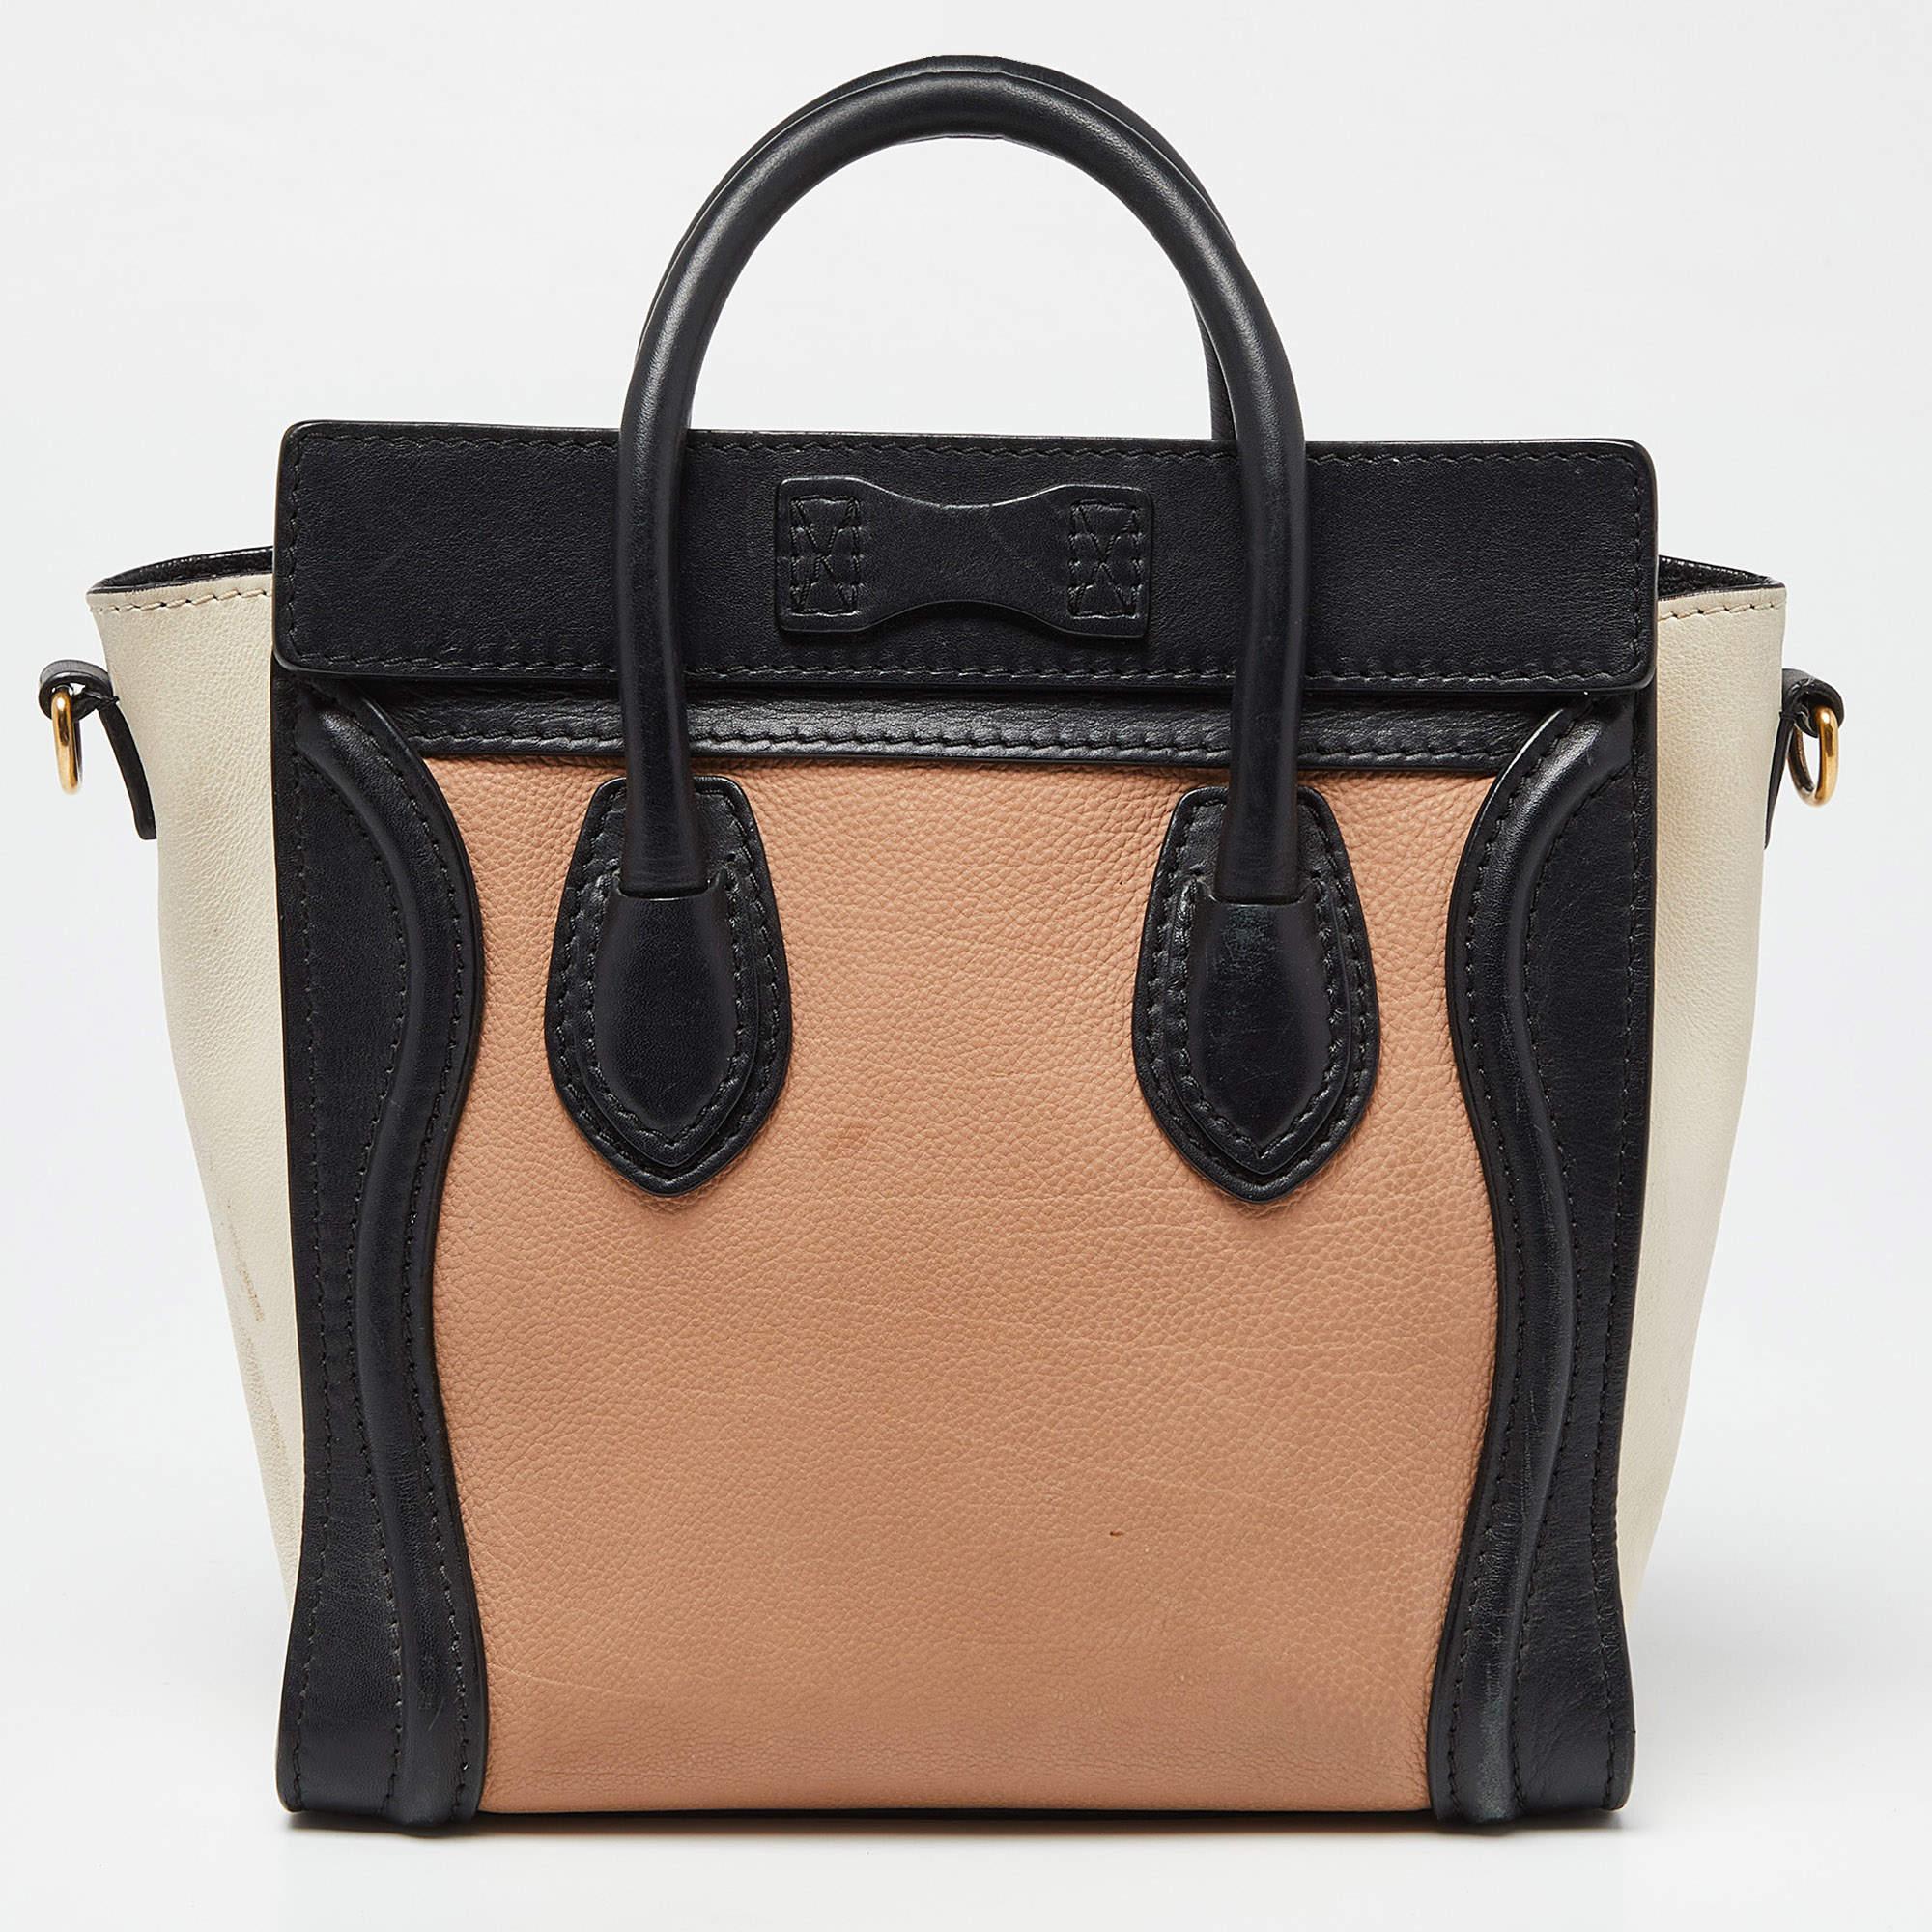 The Nano Luggage tote from Celine is one of the most popular handbags in the world. This version comes in a tricolor style. It comes with rolled top handles, a detachable shoulder strap, and a front zip pocket. The bag is equipped with a well-sized